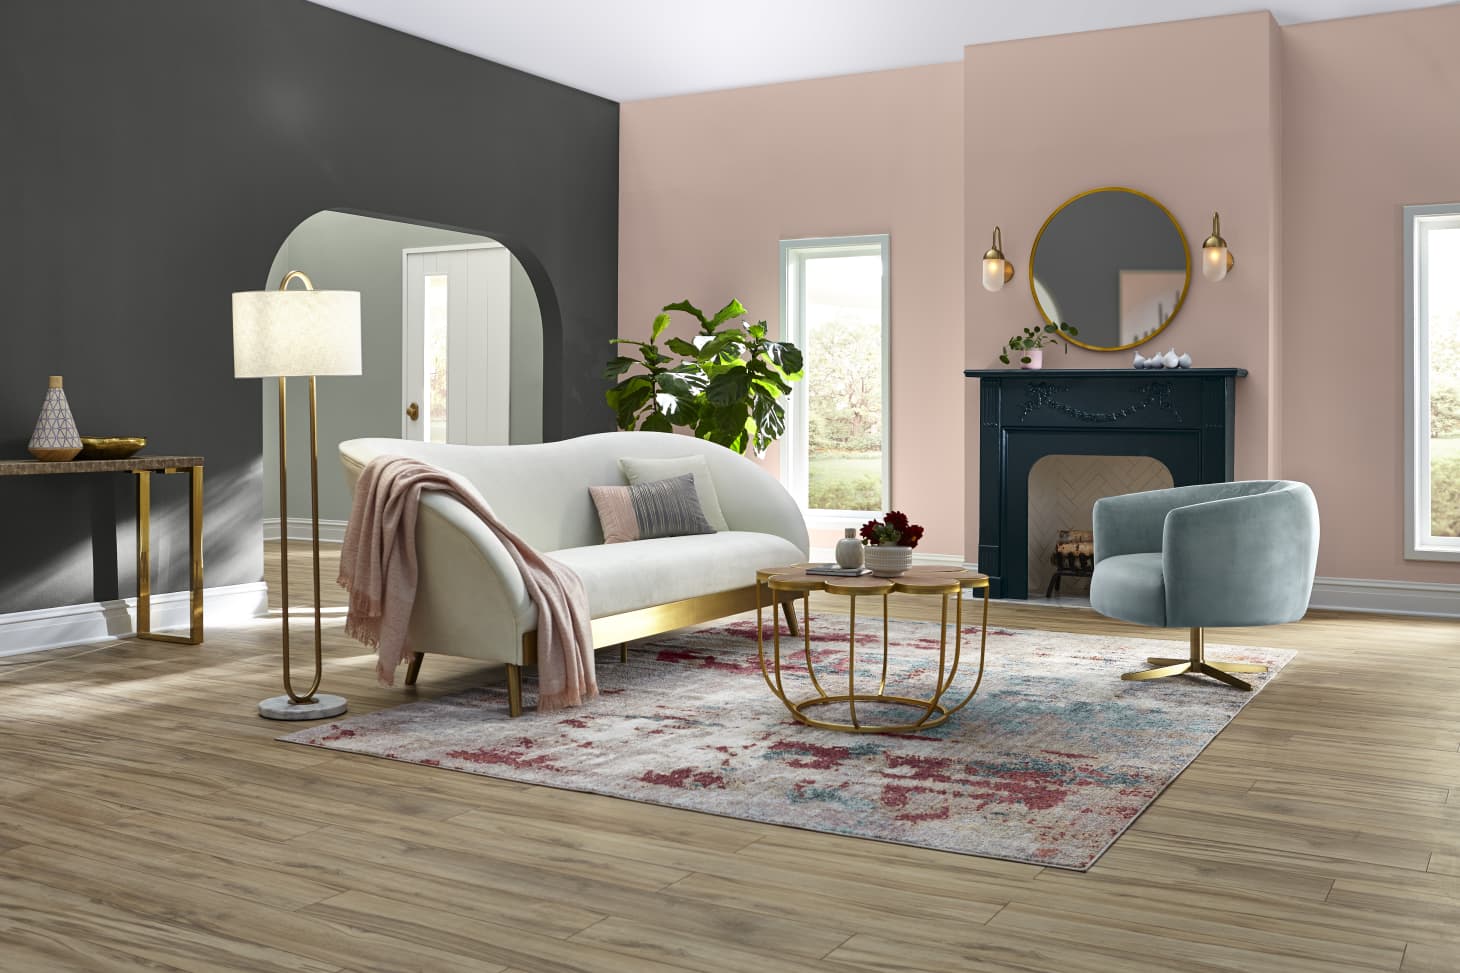 HGTV HOME By SherwinWilliams 2019 Color Of The Year